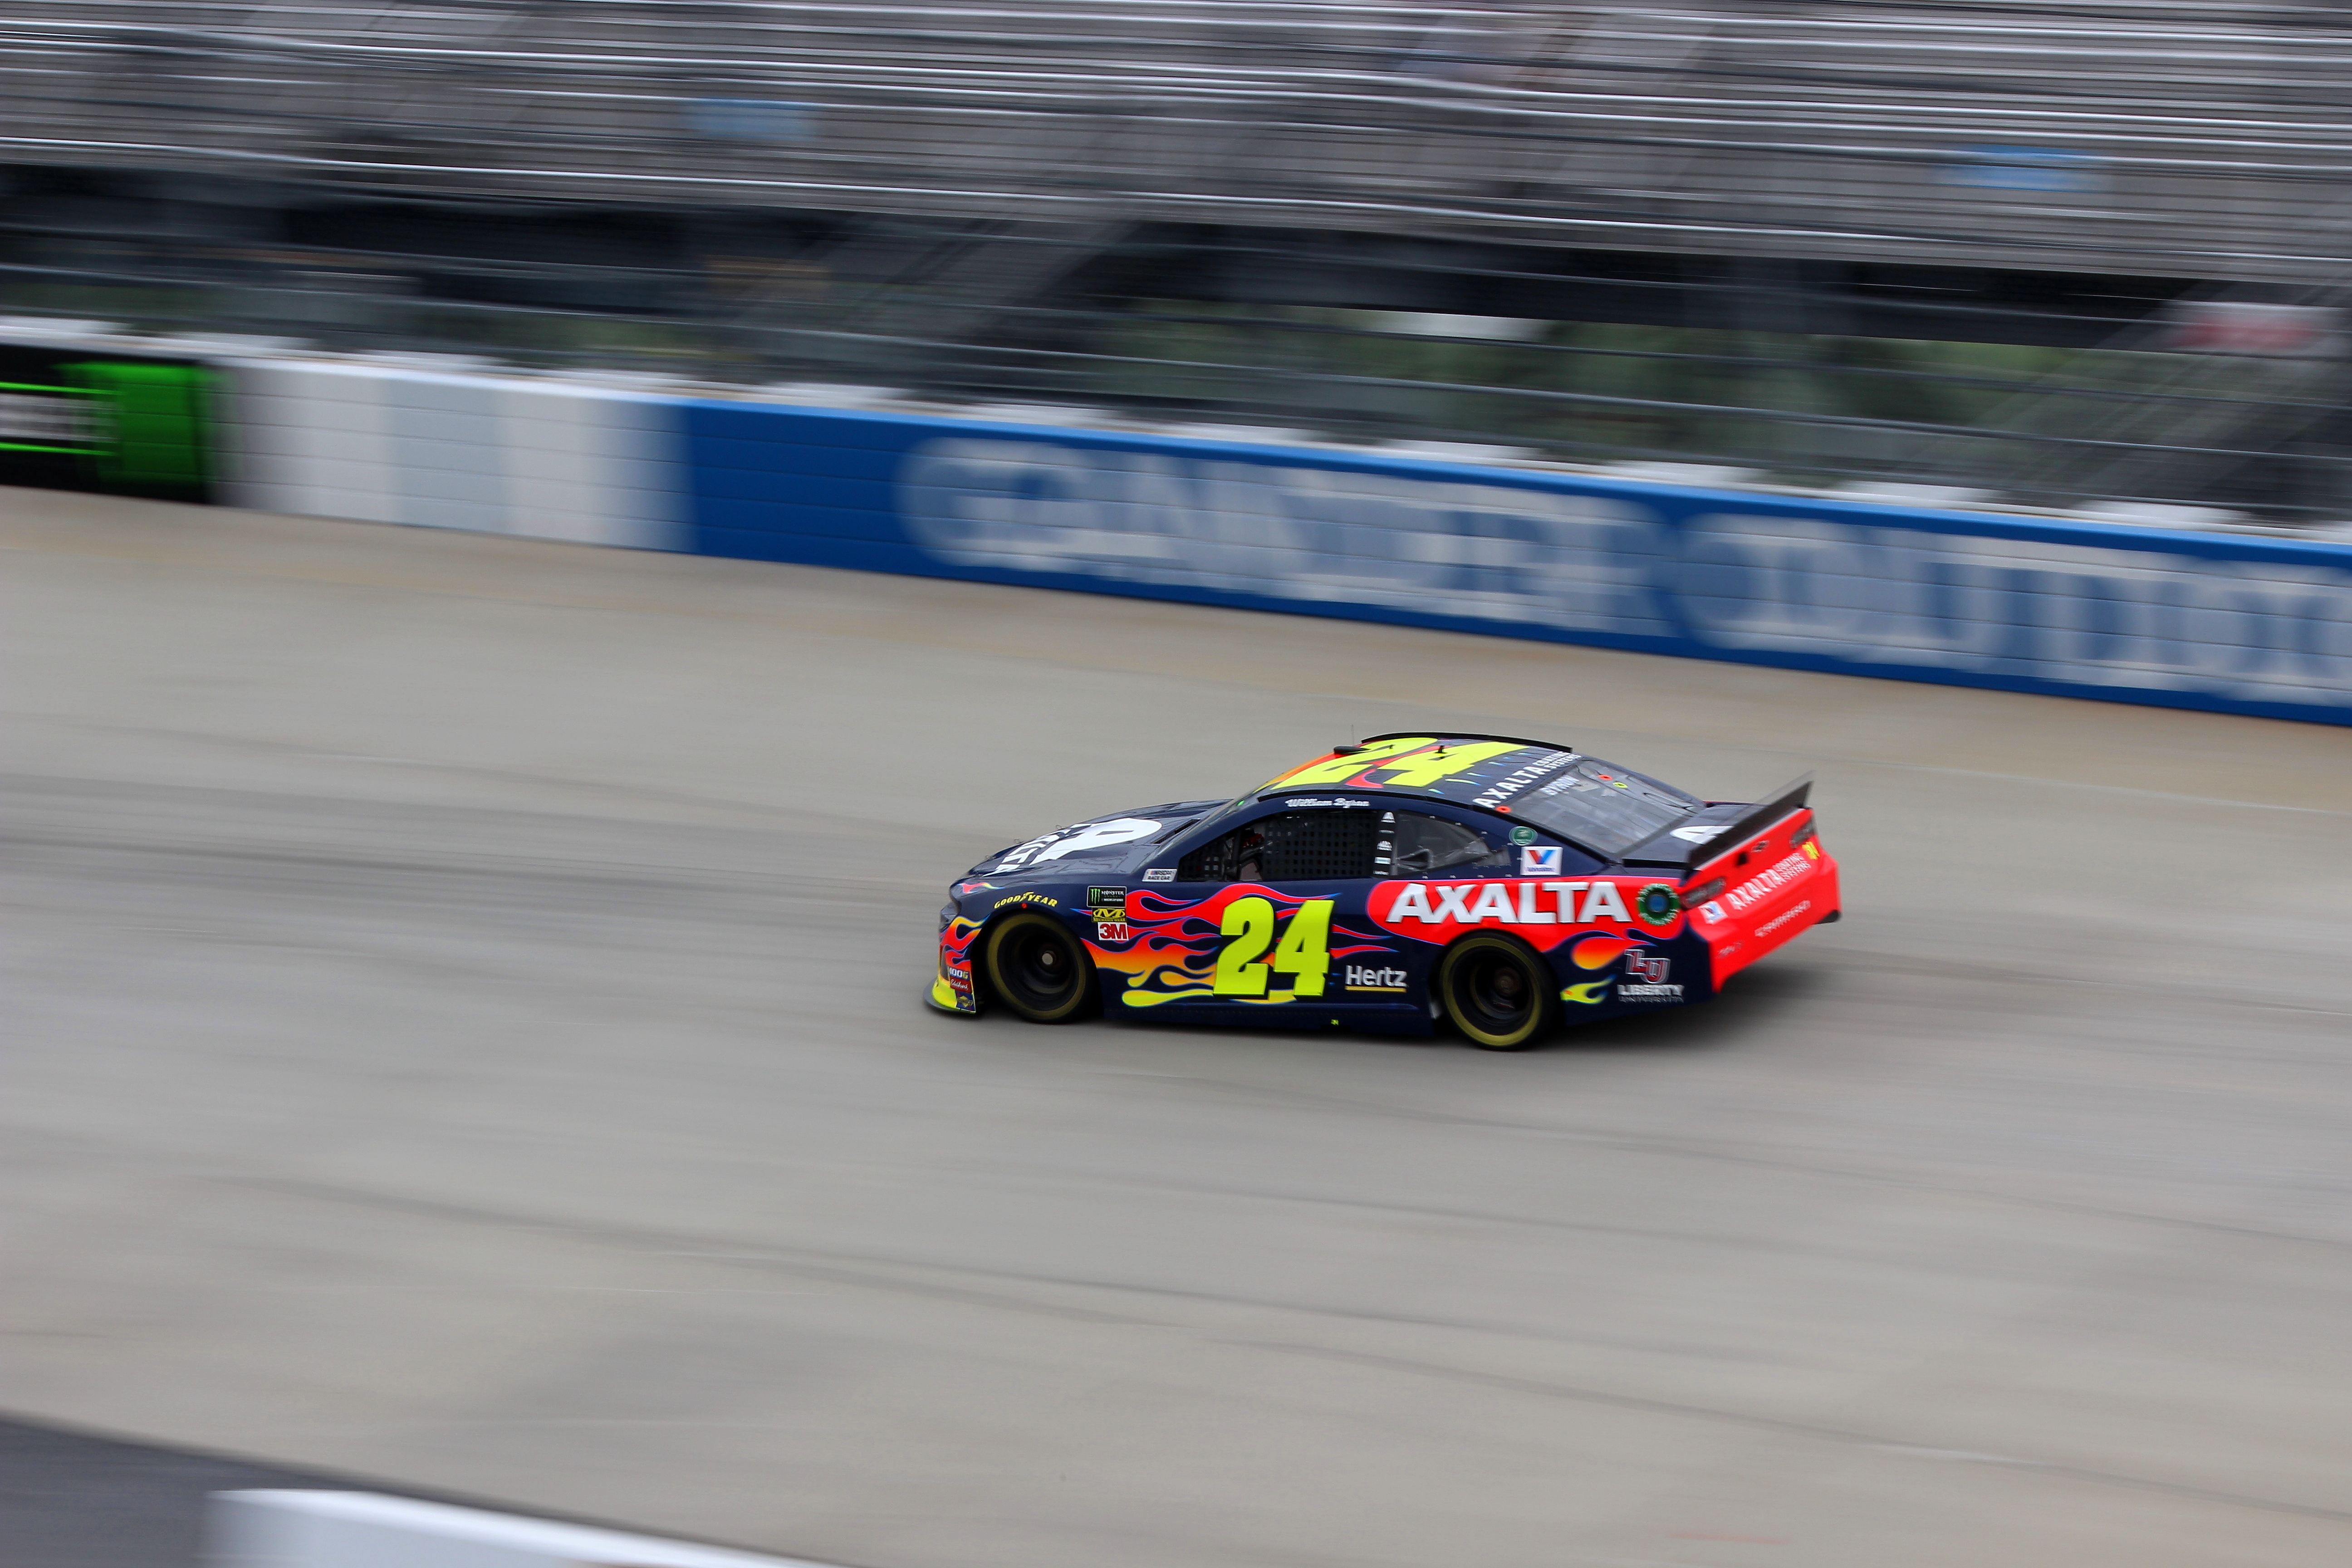 William Byron seeks his first Cup win in today's Gander RV 400 at Dover. (Photo Credit: Josh Jones/TPF)